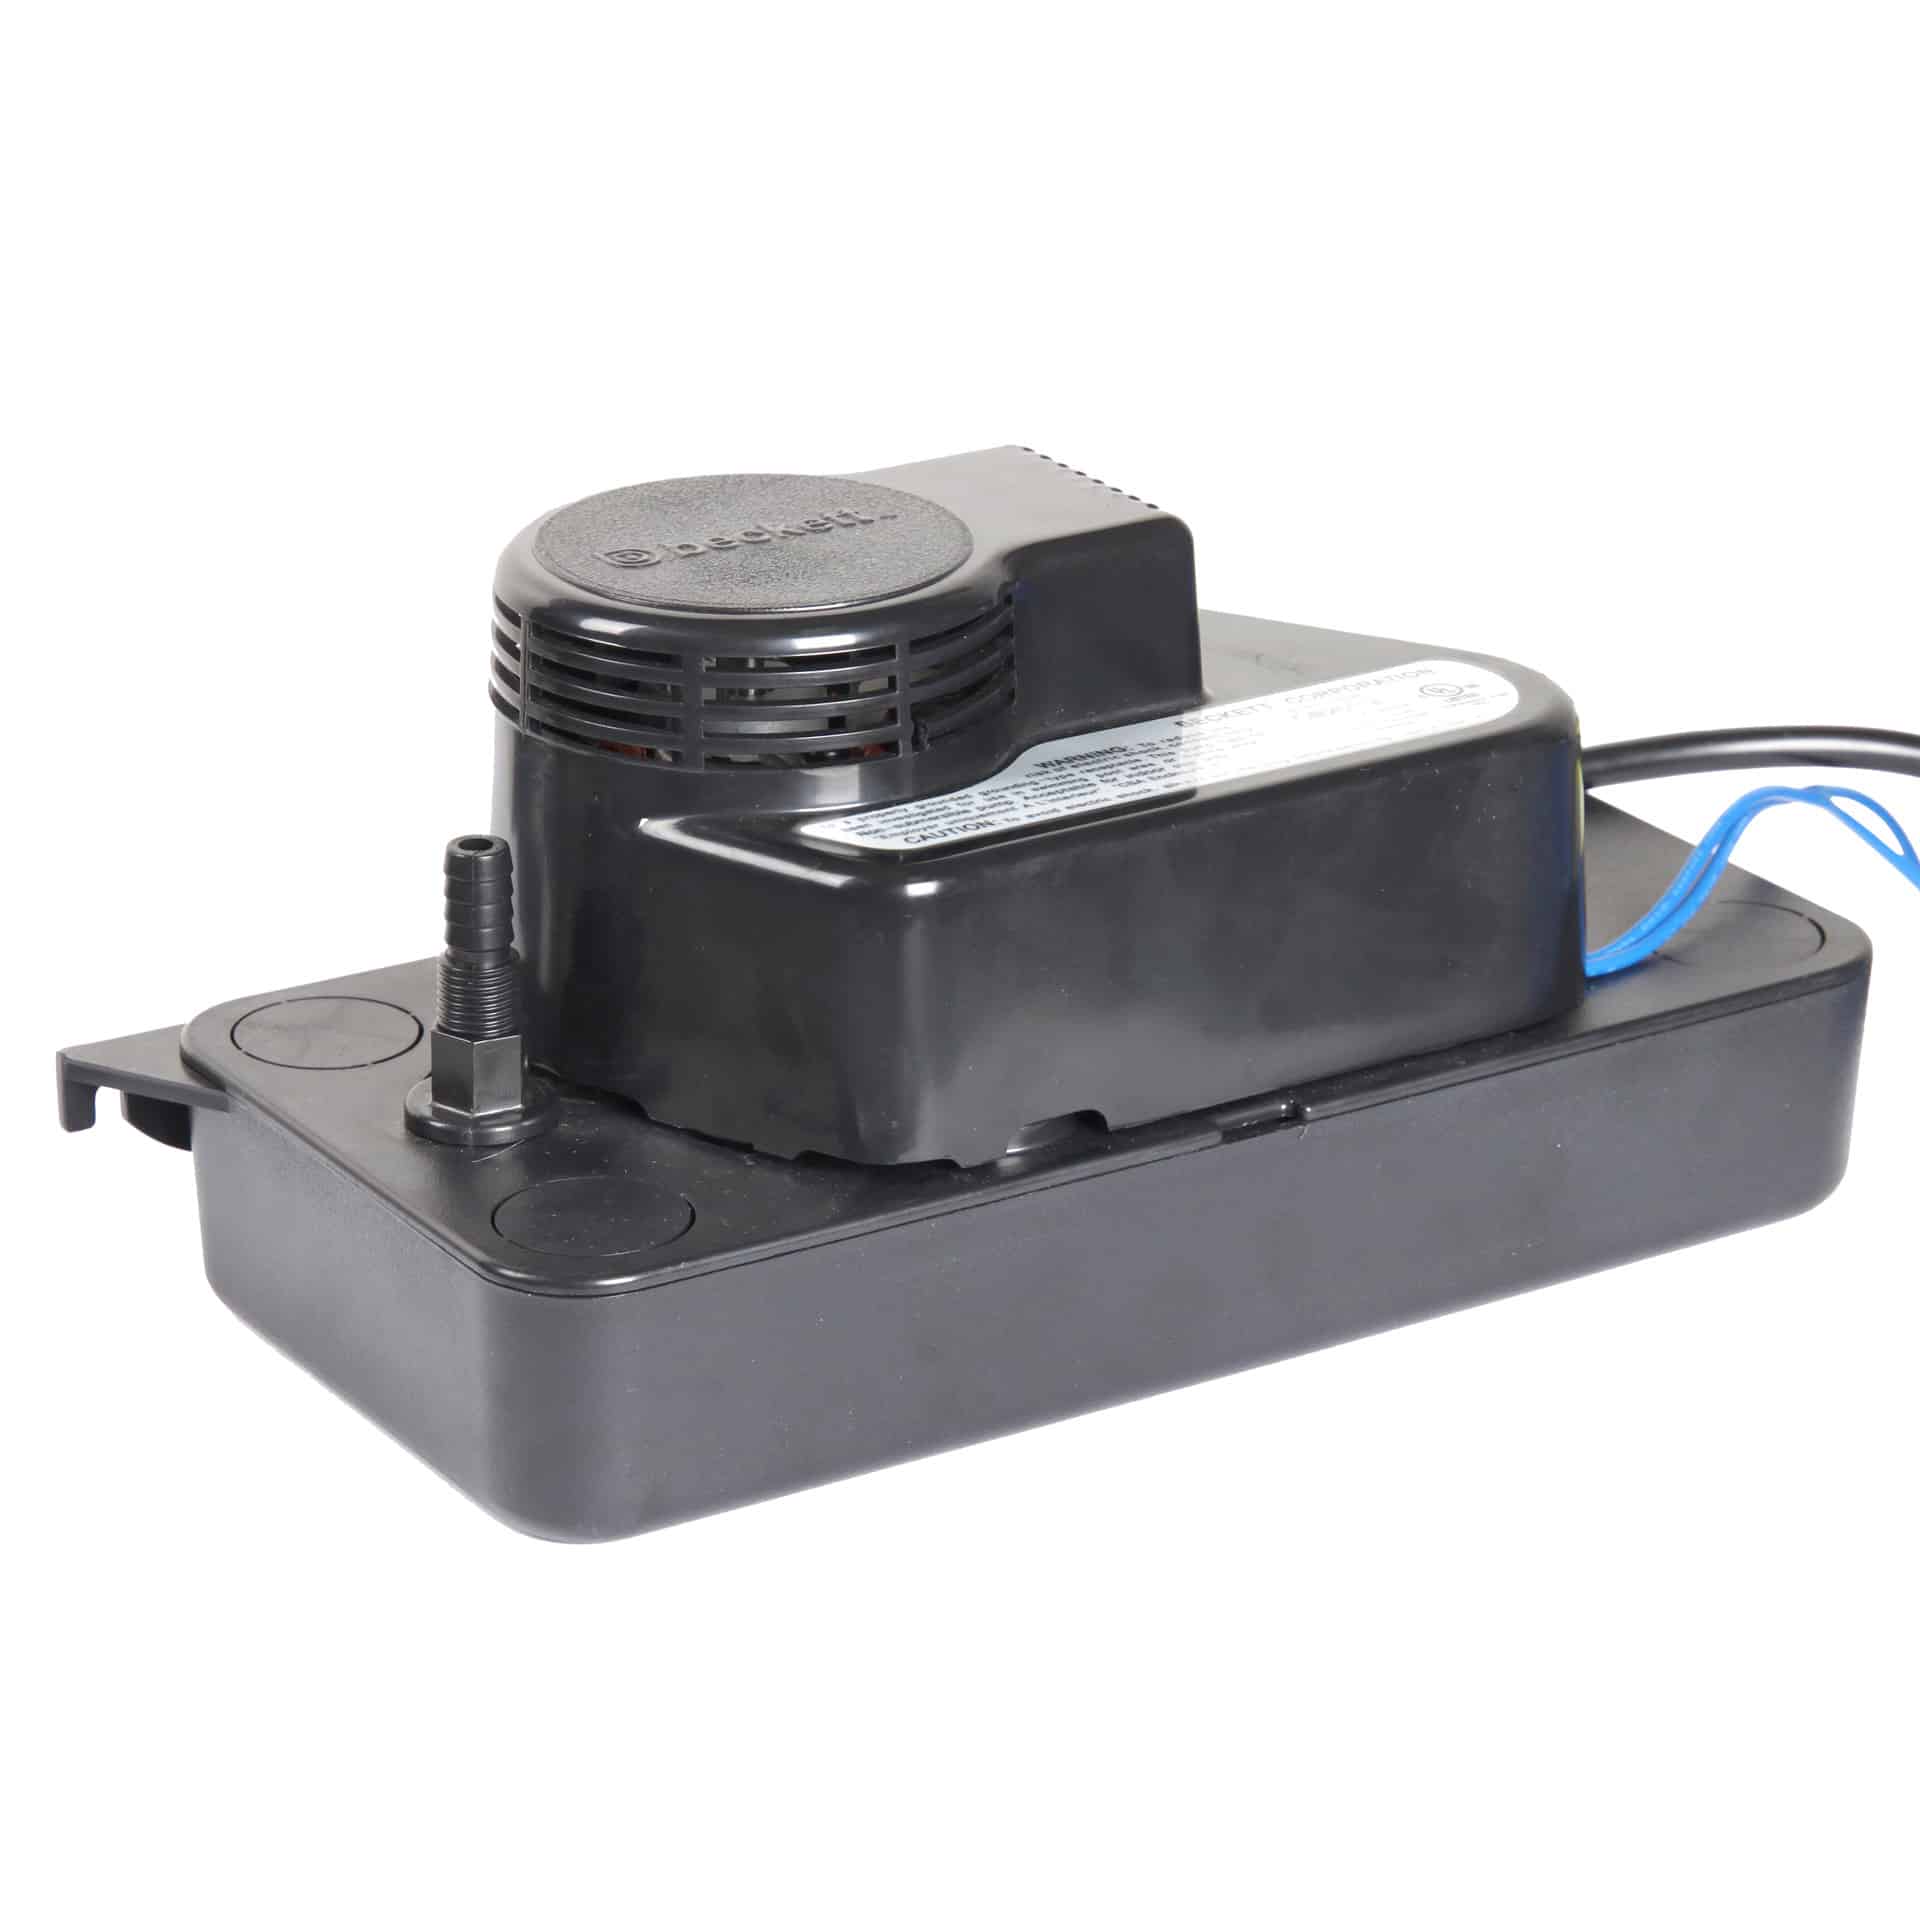 CL201UL – Low Profile Condensate Removal Pump, 115V, 20 Ft Max Lift